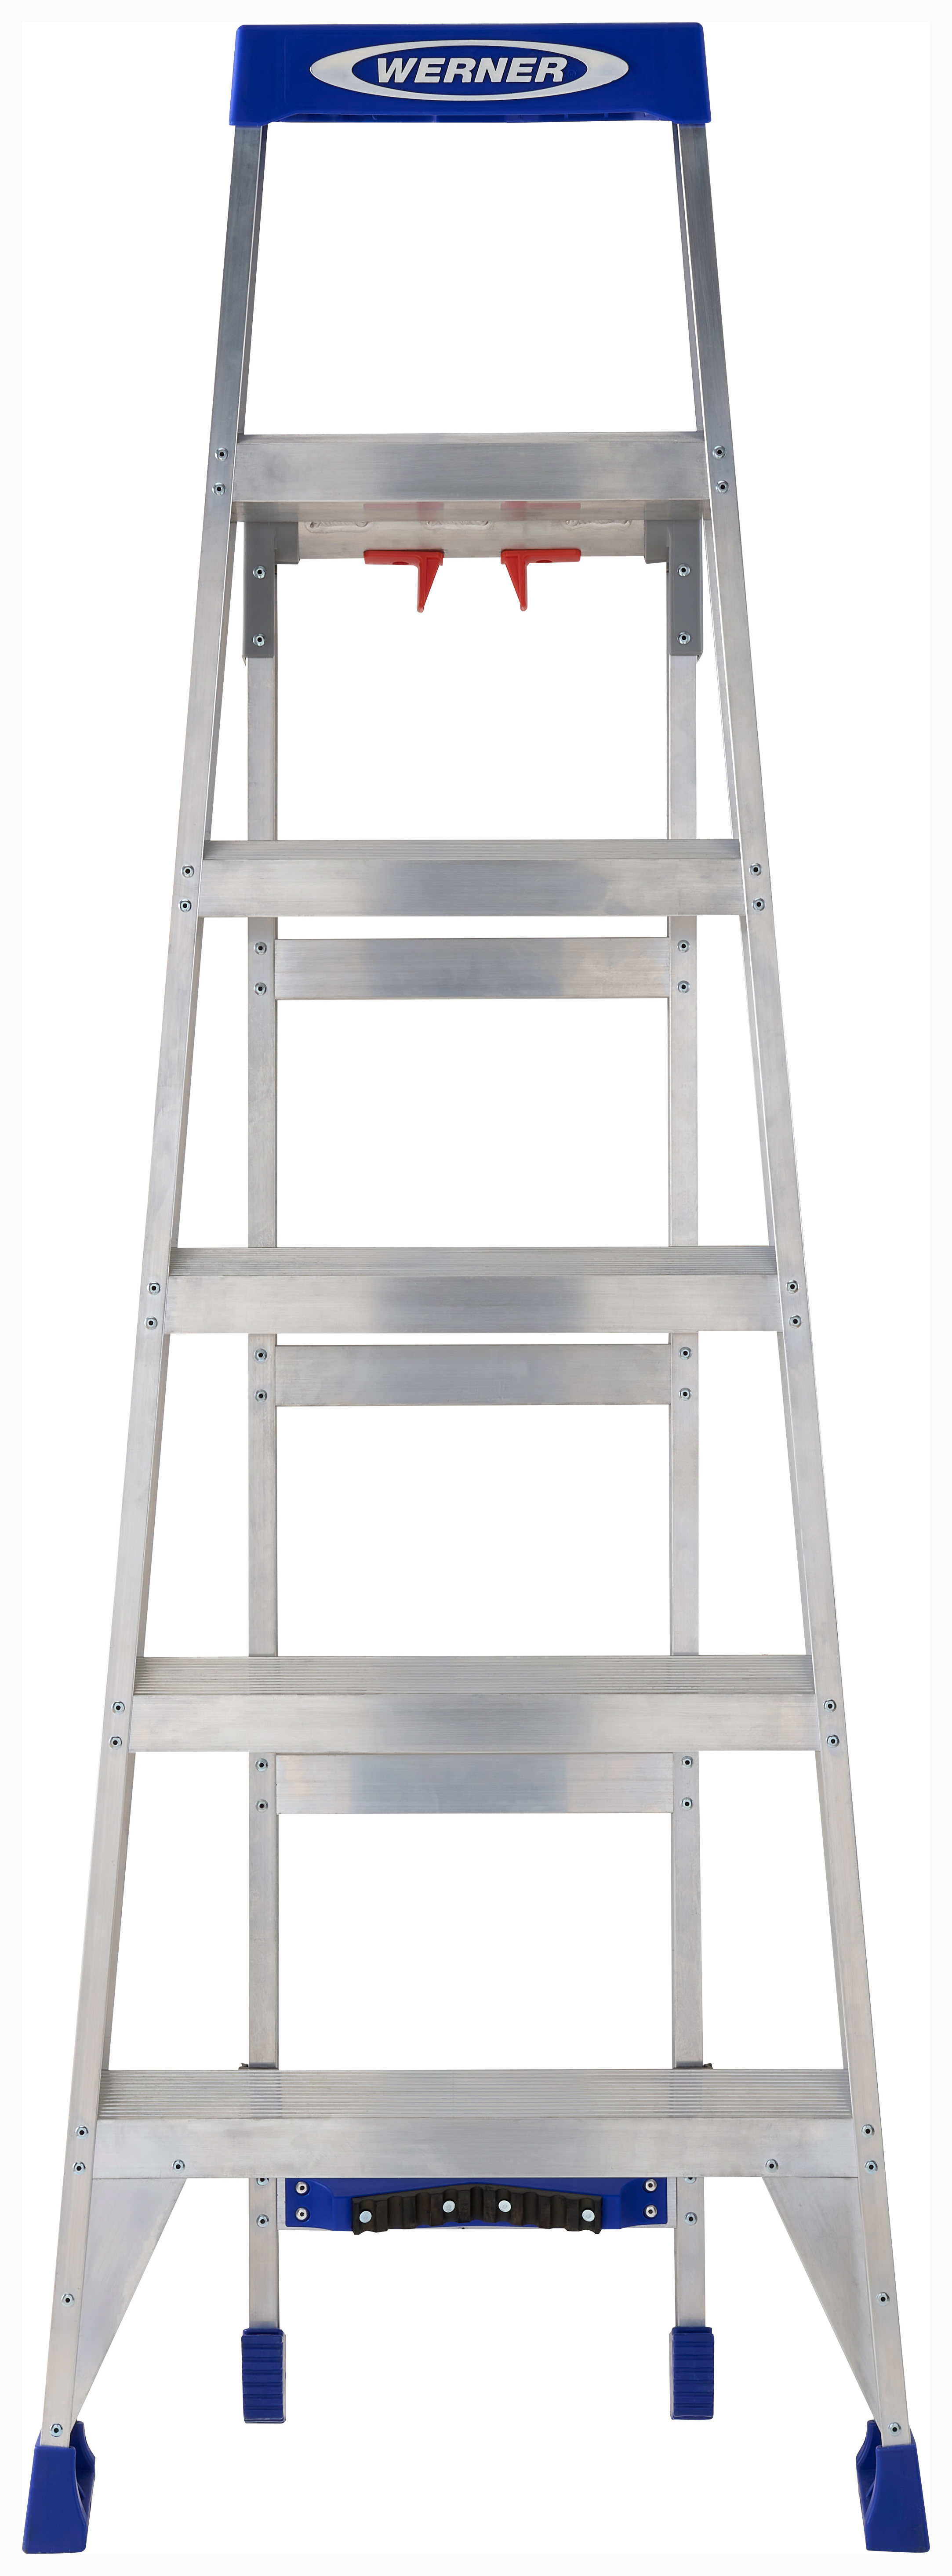 Image of Werner Leansafe 3 in 1 Aluminium Combination Ladder - 2.9m